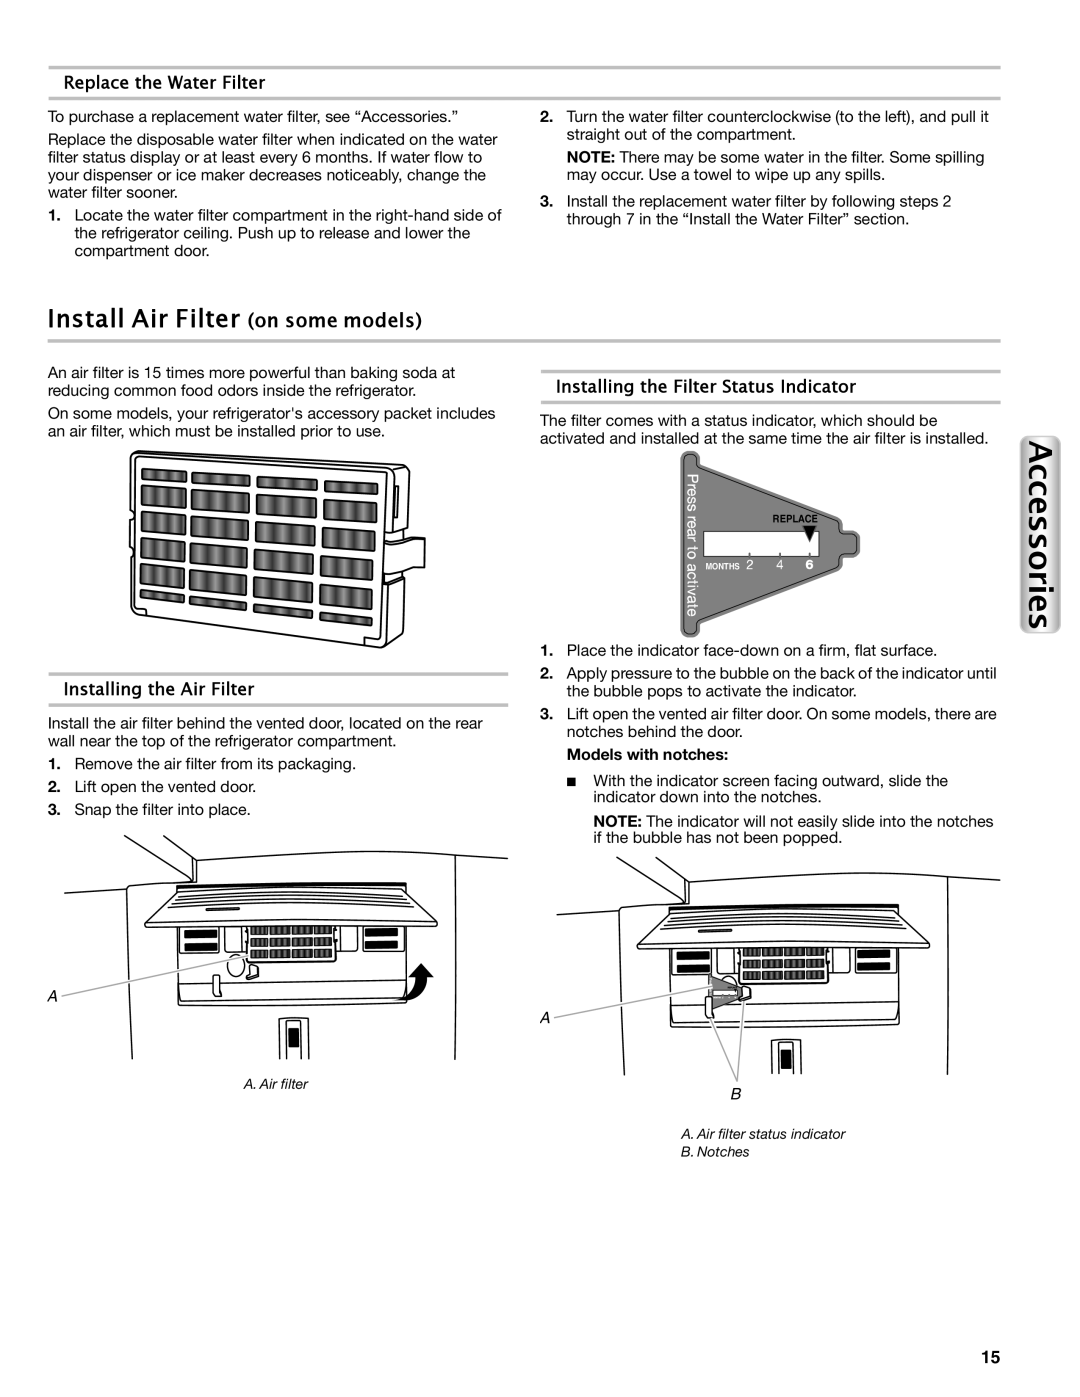 Maytag W10558104A Install Air Filter on some models, Replace the Water Filter, Installing the Air Filter, Accessories 